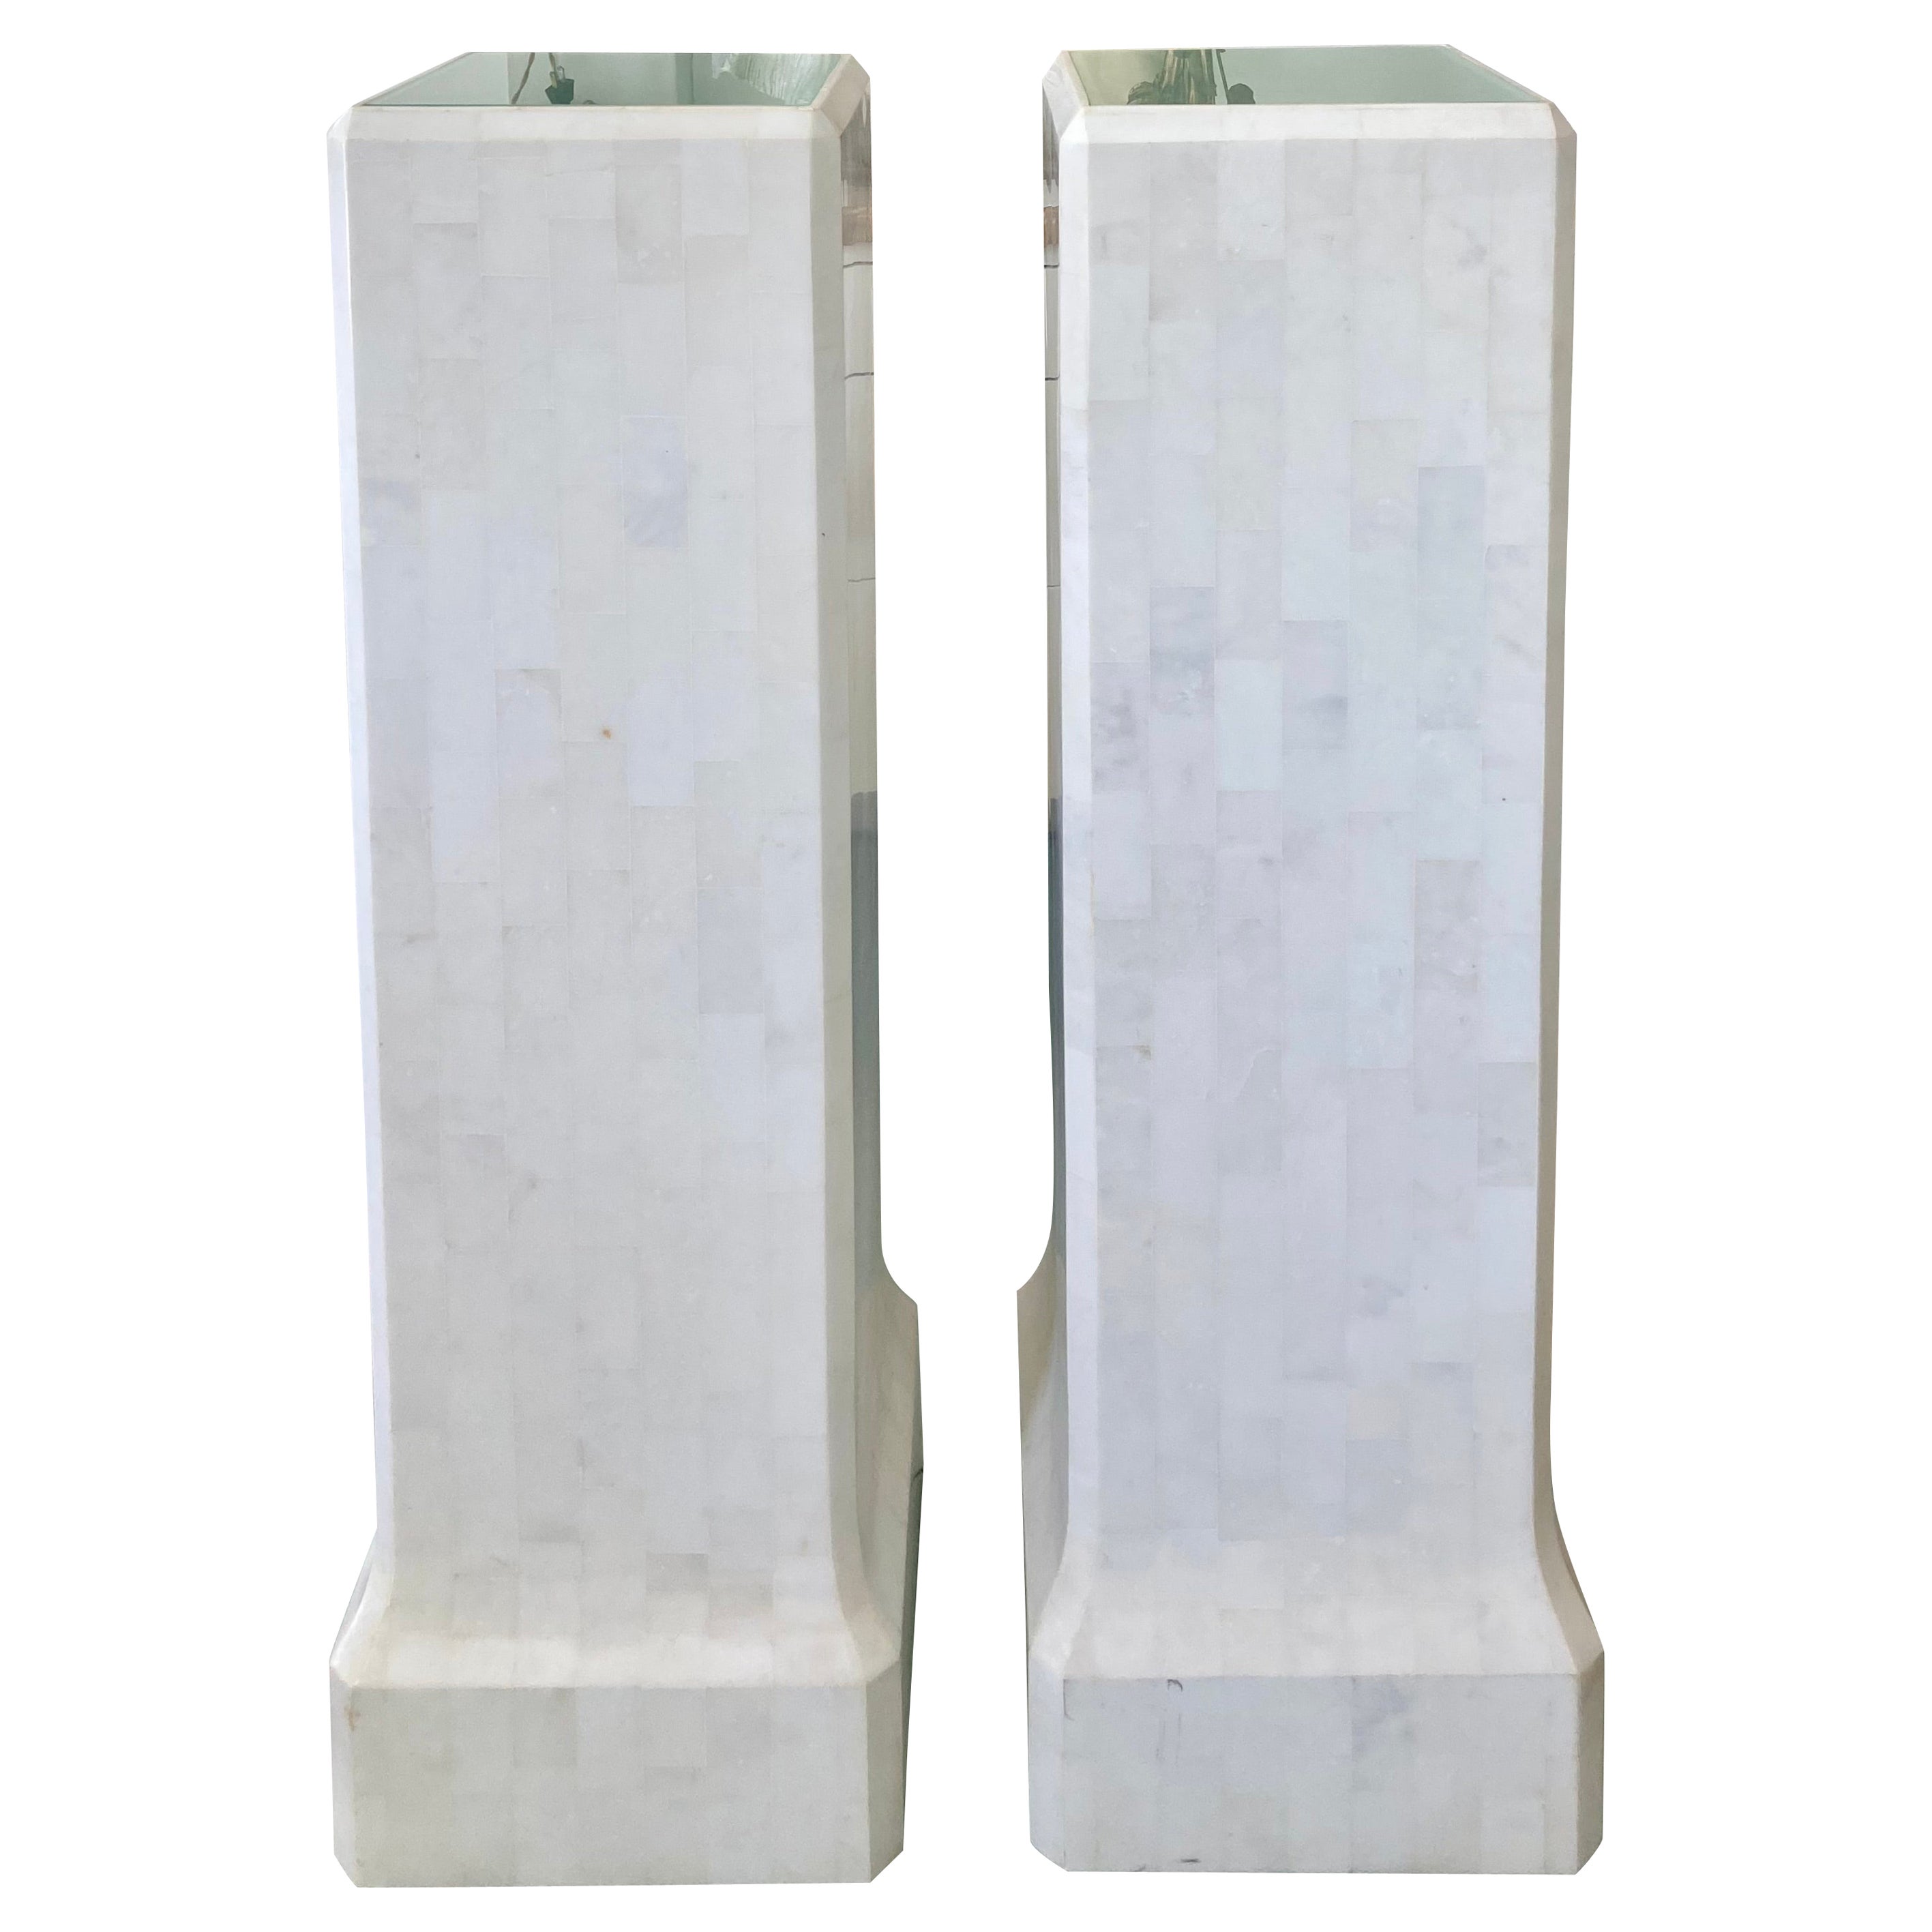 Tessellated White Marble Pedestals With Lighted Surfaces, a Pair